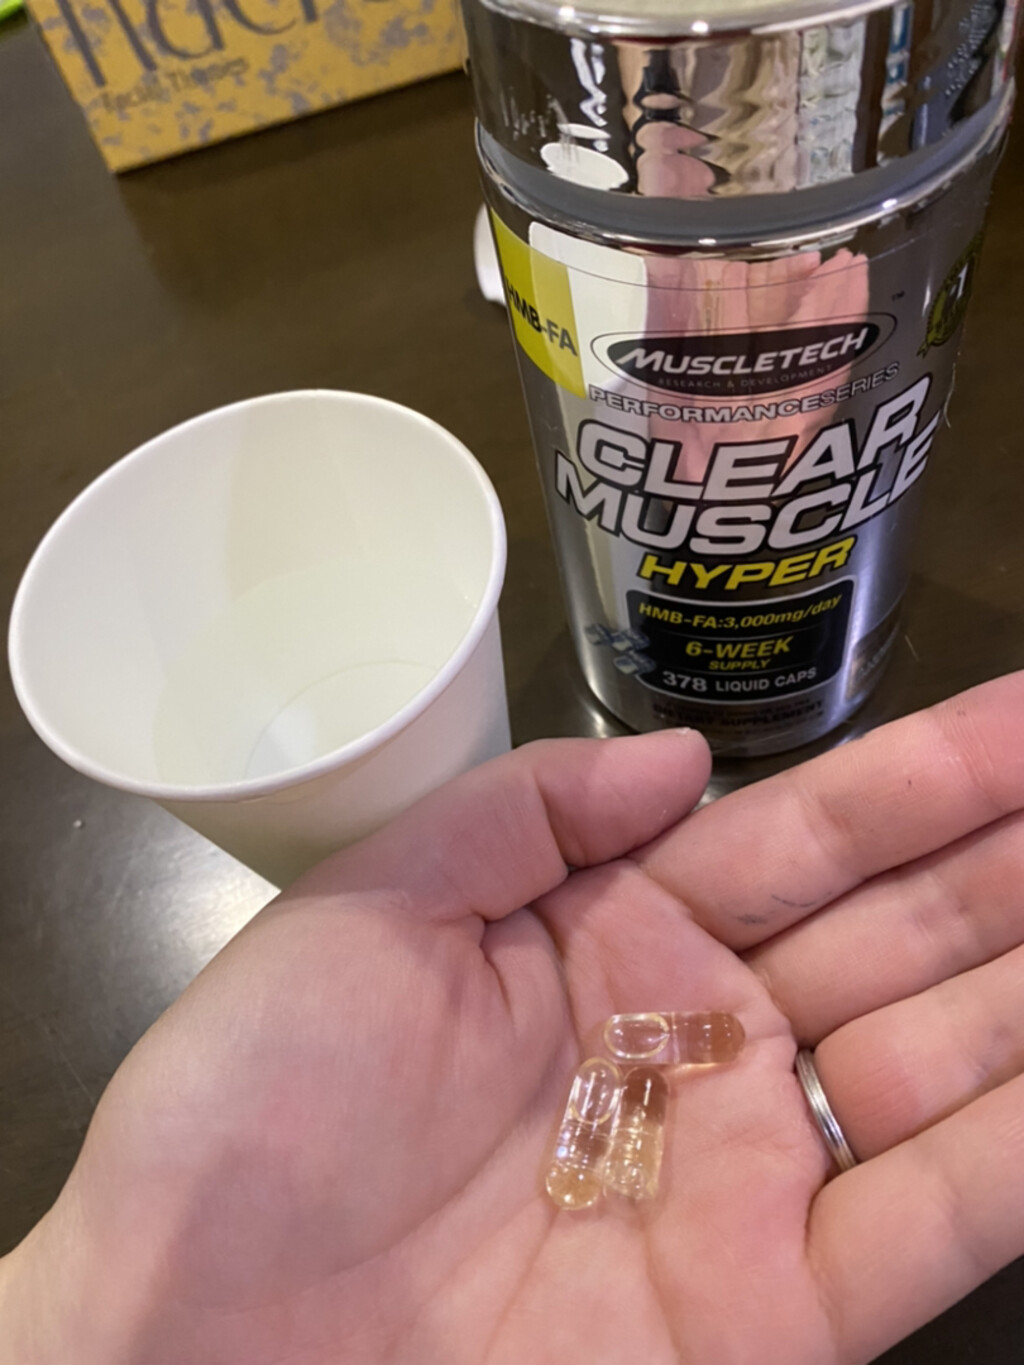 MUSCLETECH CLEAR MUSCLE HYPER | マッスルテックを使った 